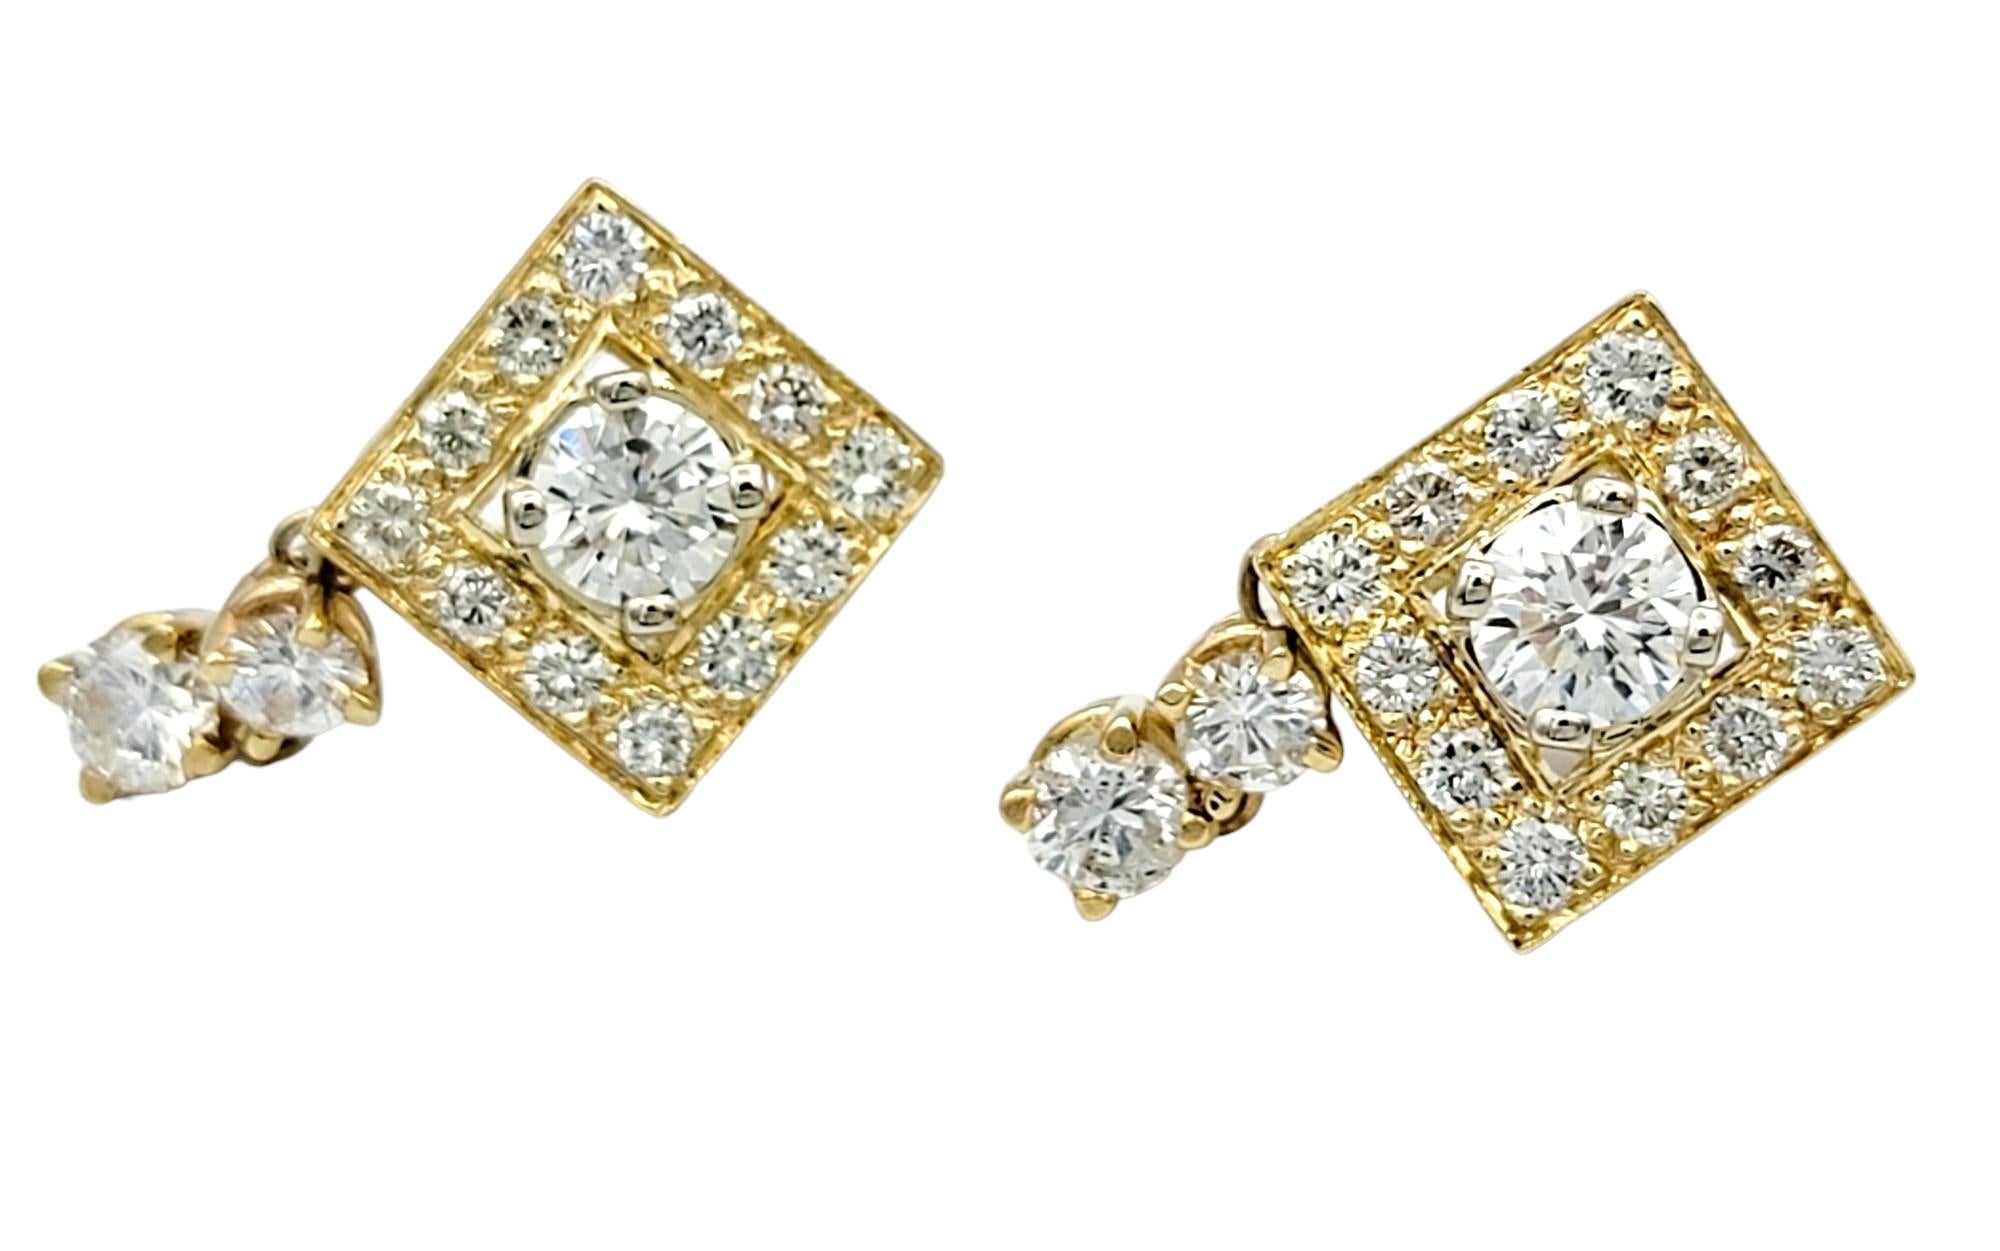 These 14 karat yellow gold earrings are a stunning embodiment of modern elegance and timeless beauty. Each earring features a central round diamond, which serves as the radiant focal point. Surrounding this brilliant centerpiece is a unique squared